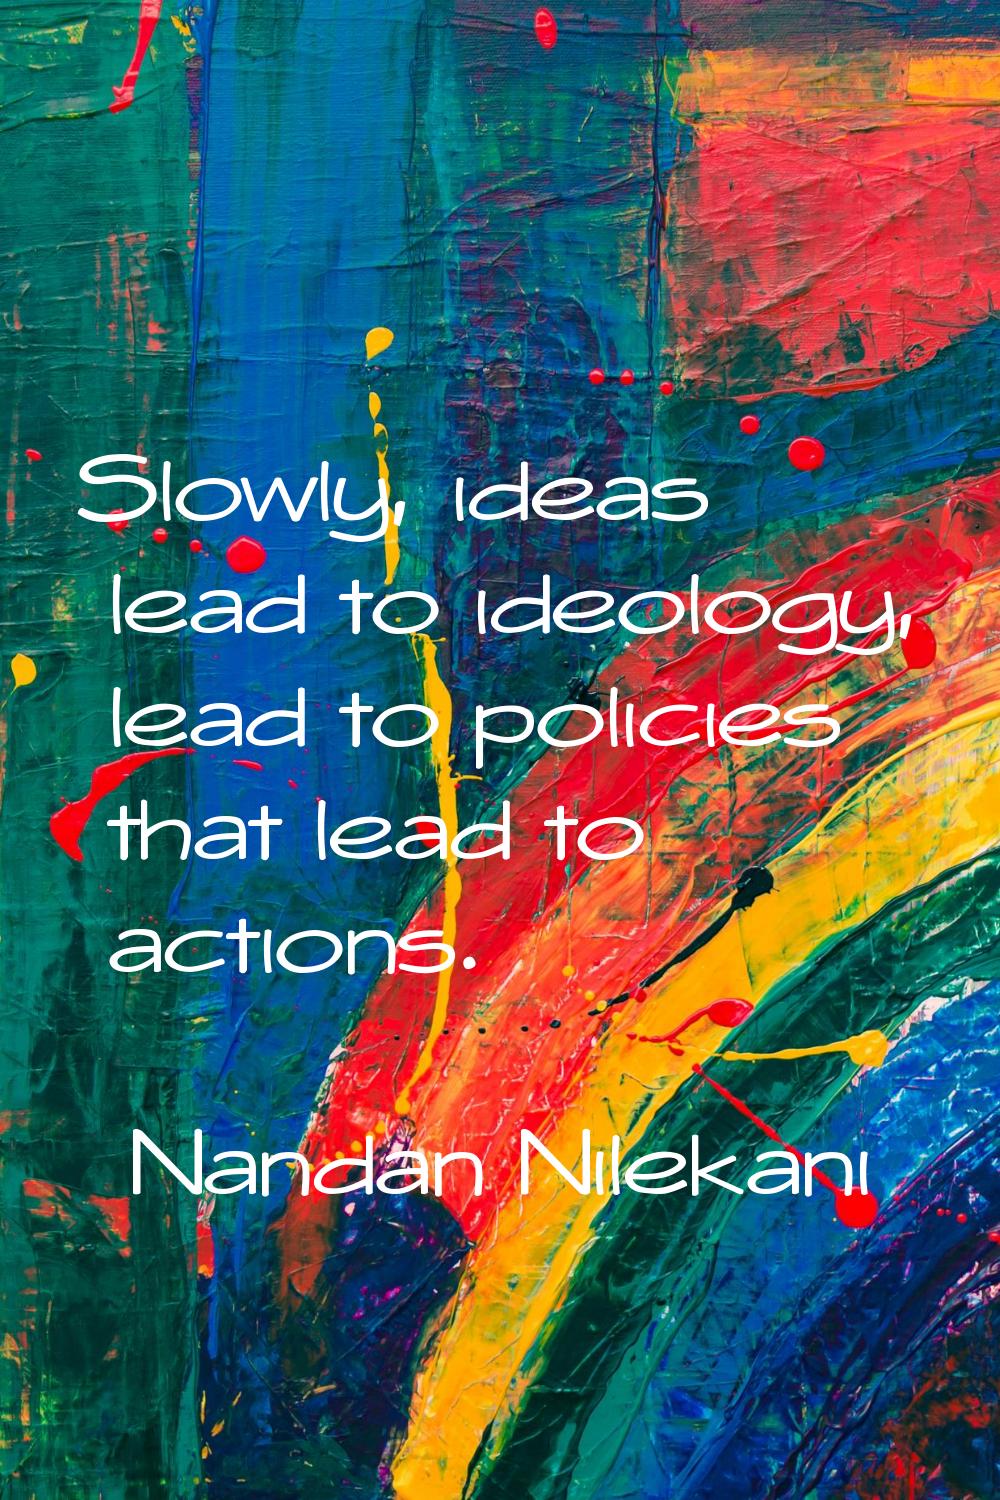 Slowly, ideas lead to ideology, lead to policies that lead to actions.